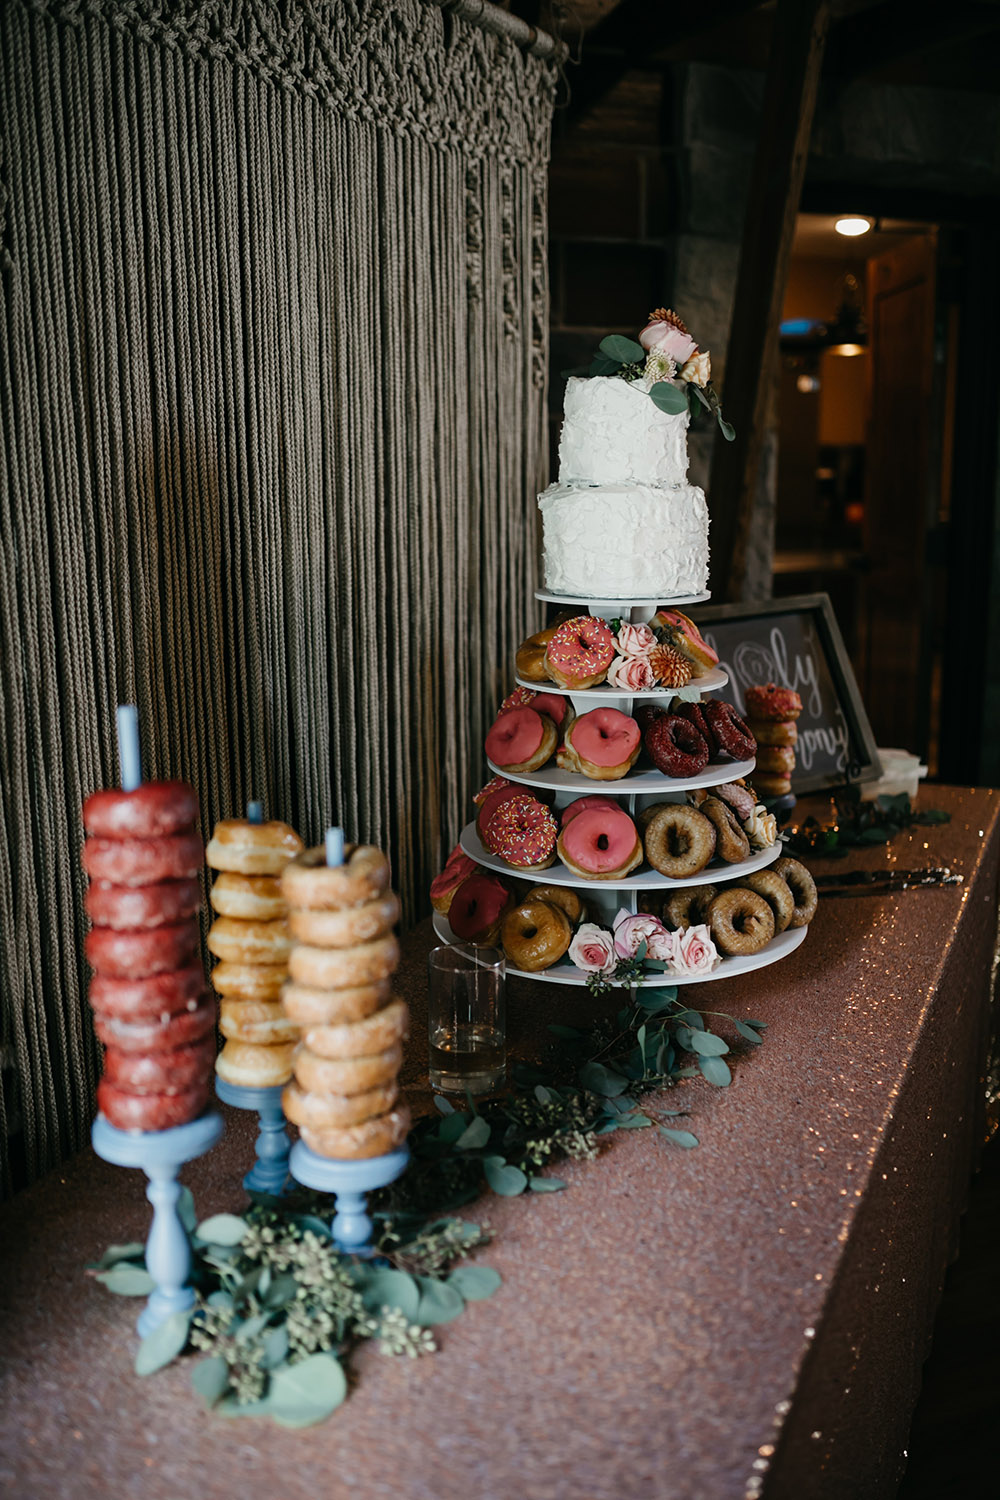 Wedding Desserts - Donuts and Cake